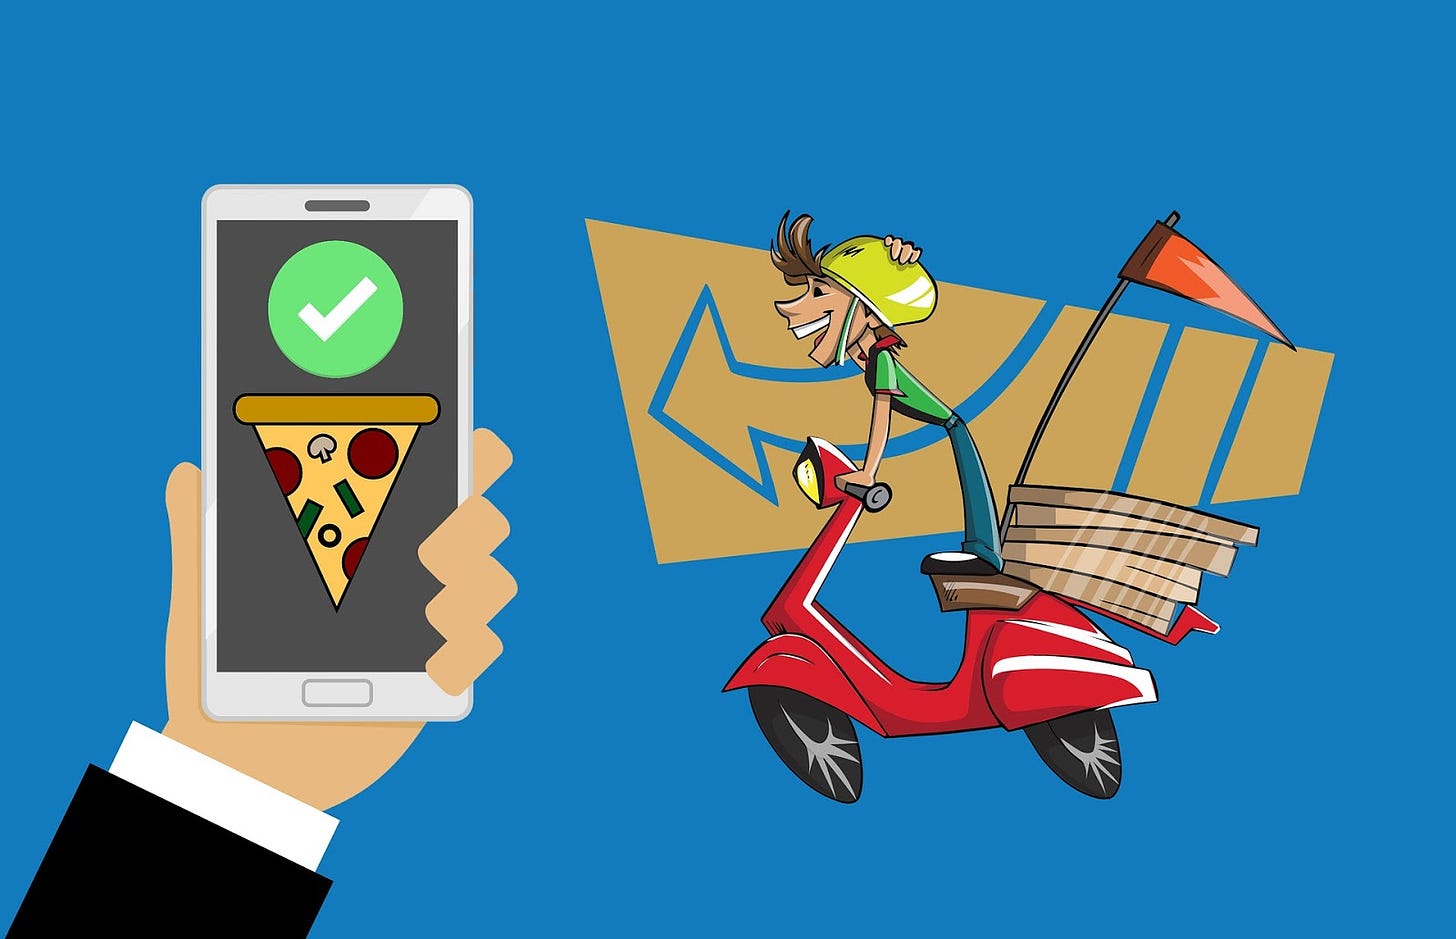 Someone holding up  a phone with a pizza slice and a check mark. To the right is a happy person on a red scooter carrying lots of pizza boxes.